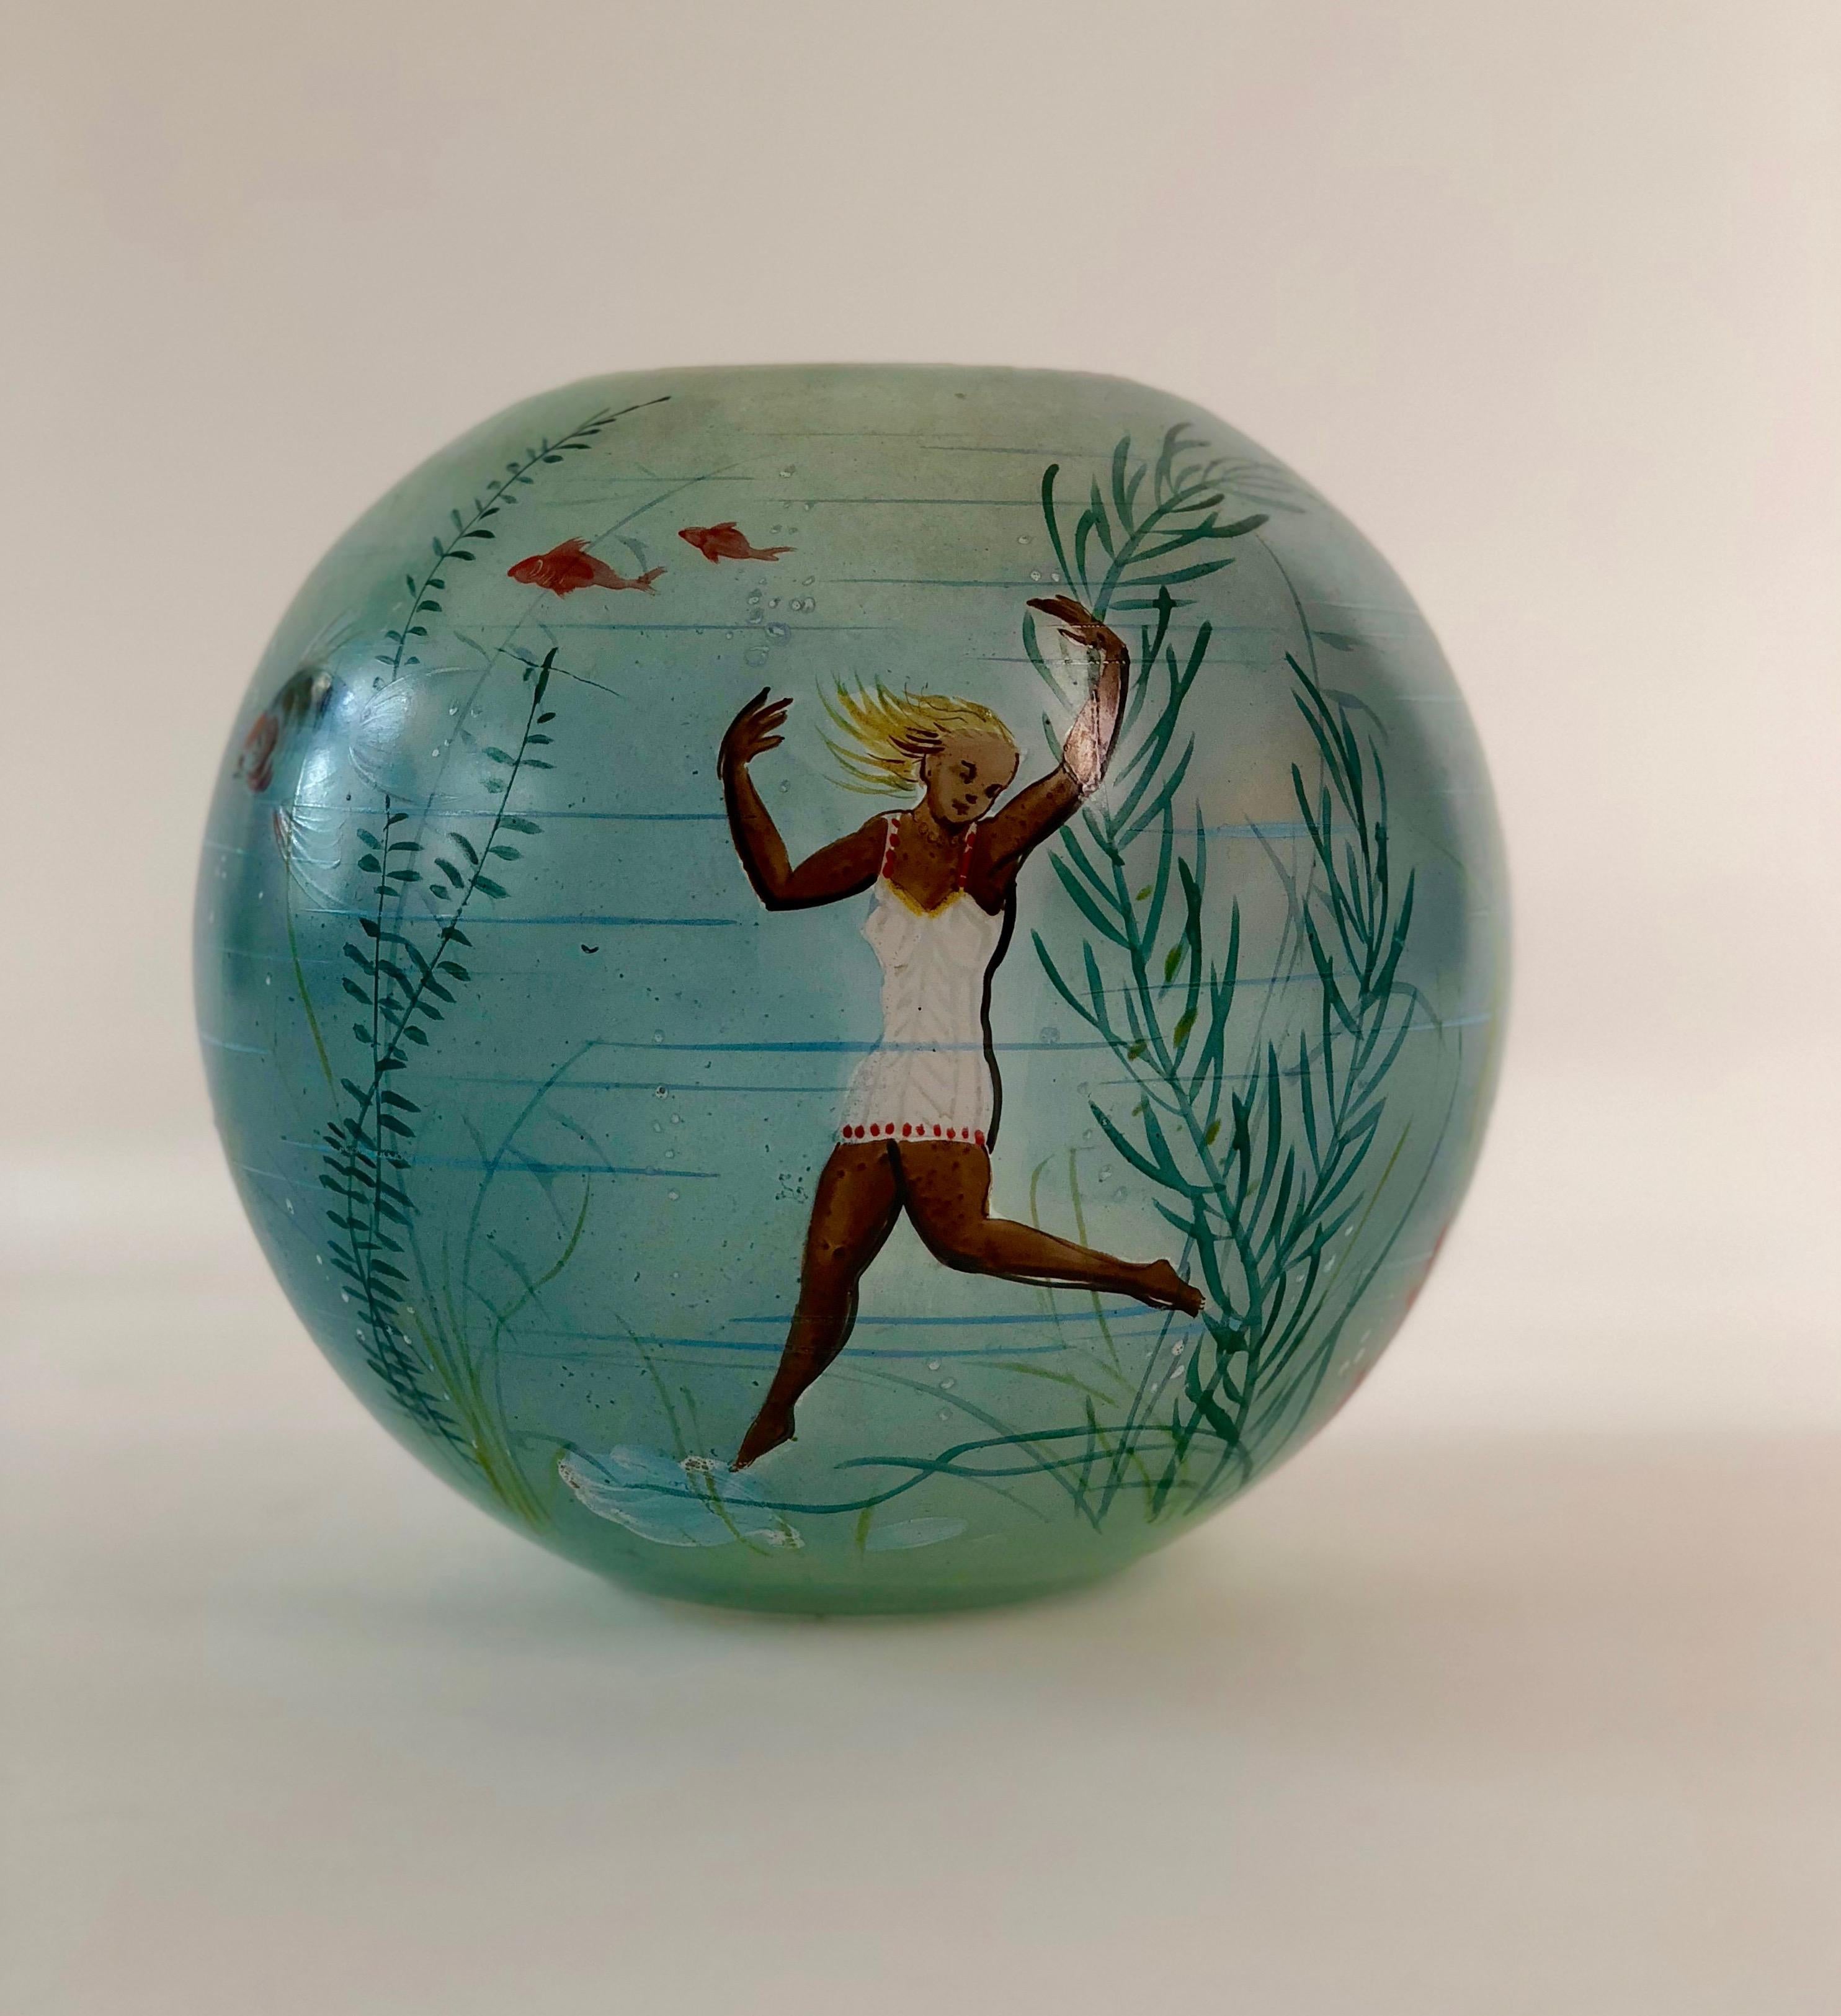 Lovely glass vase with hand painted swimming girls and undersea world from 1950.
The mouth of the vase has rough texture from use.
   